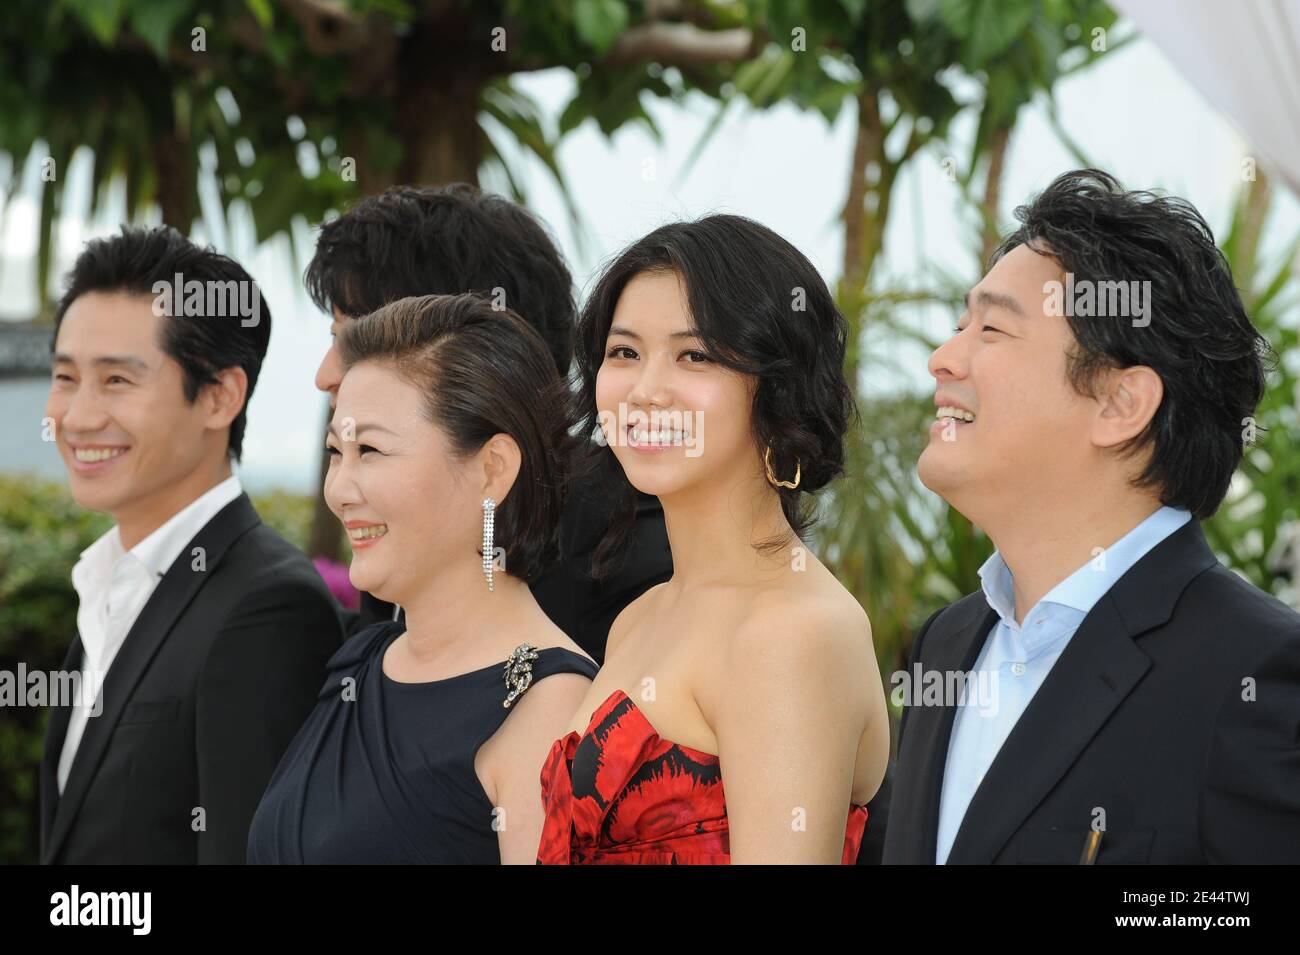 South-Korean director Chan-Wook Park (R), Kim Ok-Bin (2ndR), Kim Hae-Sook (C), Song Kang-Ho (2ndL), Shin Ha-Kyun (R) attend the 'Thirst' Photocall held at the Palais Des Festivals during the 62nd International Cannes Film Festival in Cannes, France on May 15, 2009. Photo by Nebinger-Orban/ABACAPRESS.COM Stock Photo